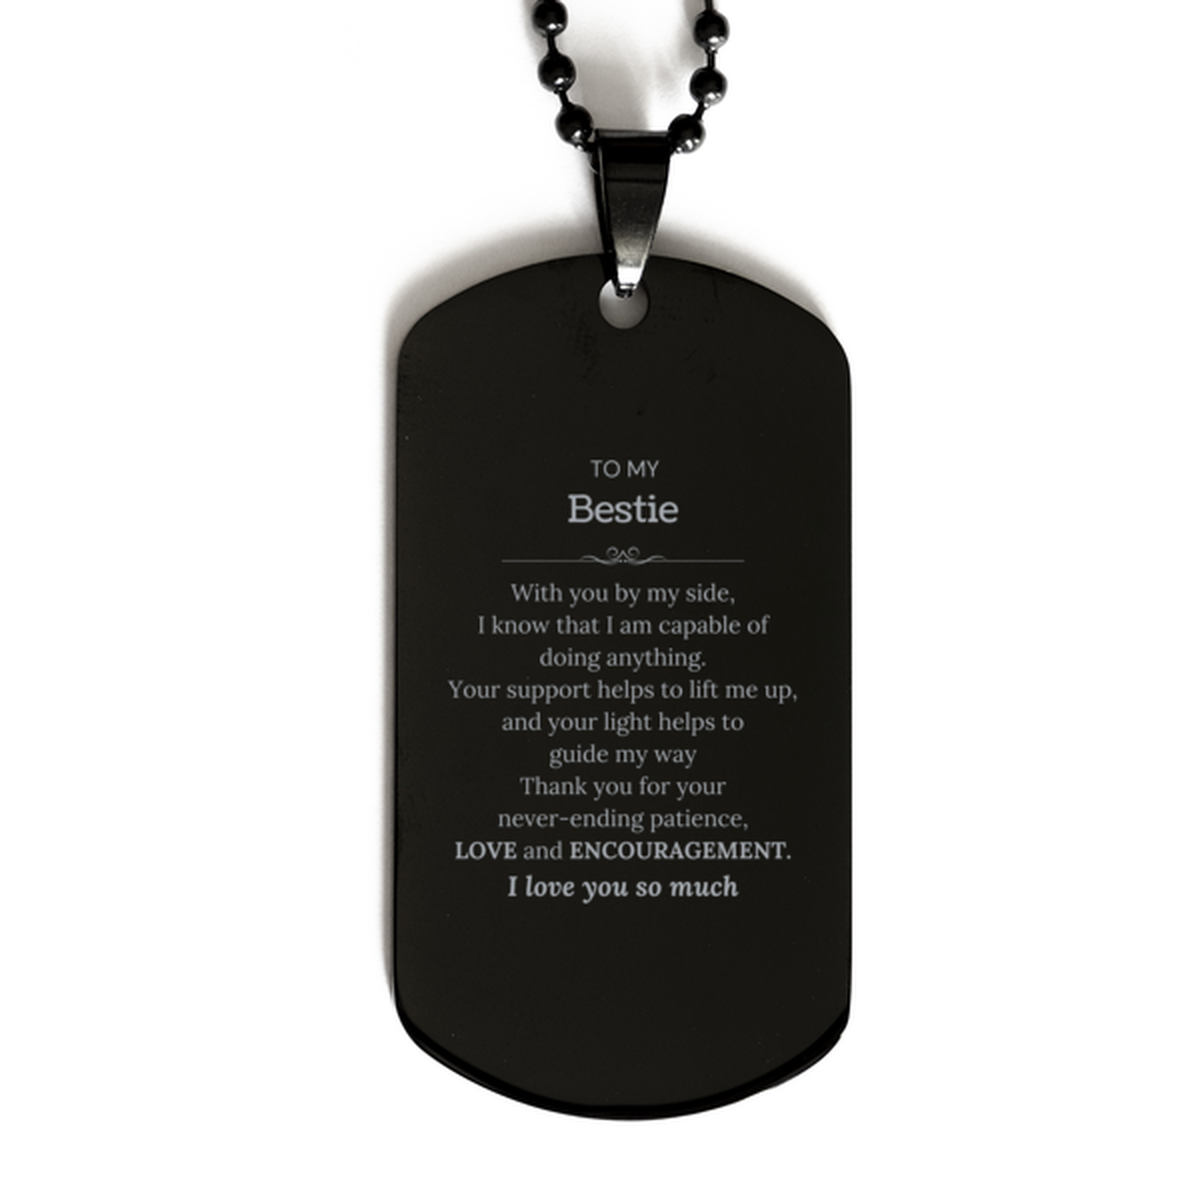 Appreciation Bestie Black Dog Tag Gifts, To My Bestie Birthday Christmas Wedding Keepsake Gifts for Bestie With you by my side, I know that I am capable of doing anything. I love you so much